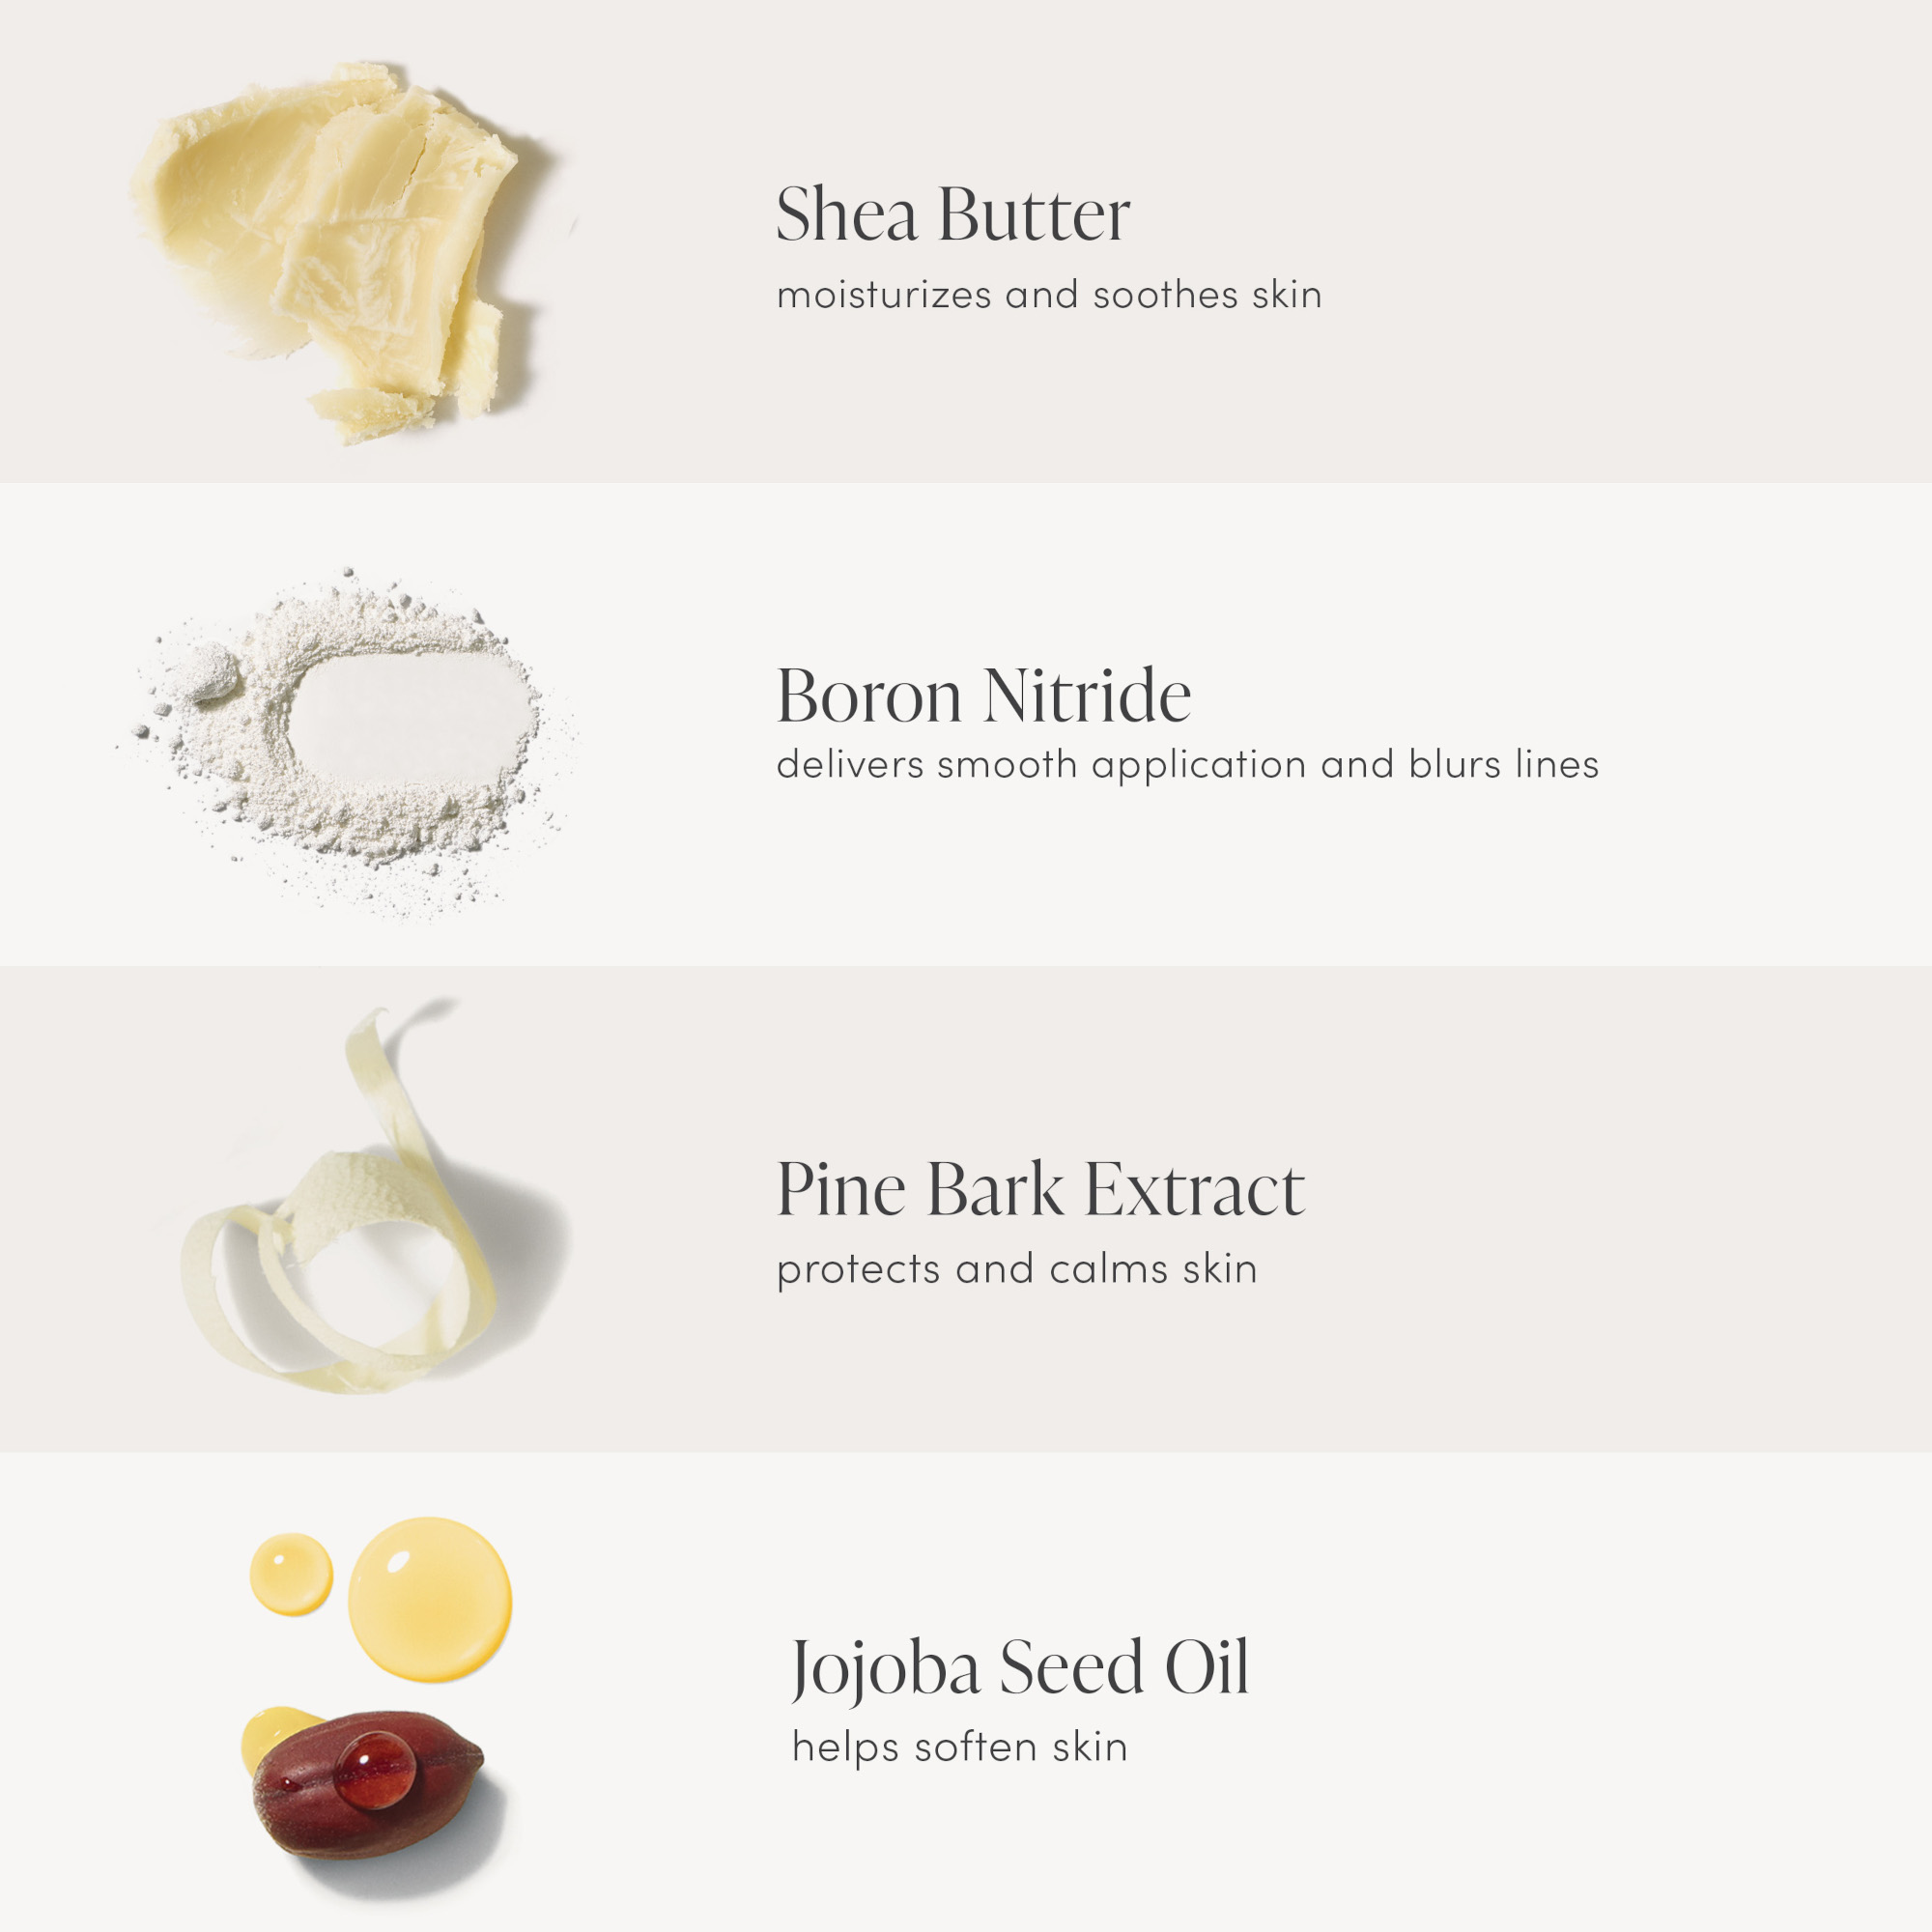 Image 1 - Shea Butter moisturizes and soothes skin. Boron Nitride delivers smooth application and blurs lines. Pine Bark Extract protects and calms skin. Jojoba Seed Oil helps soften skin